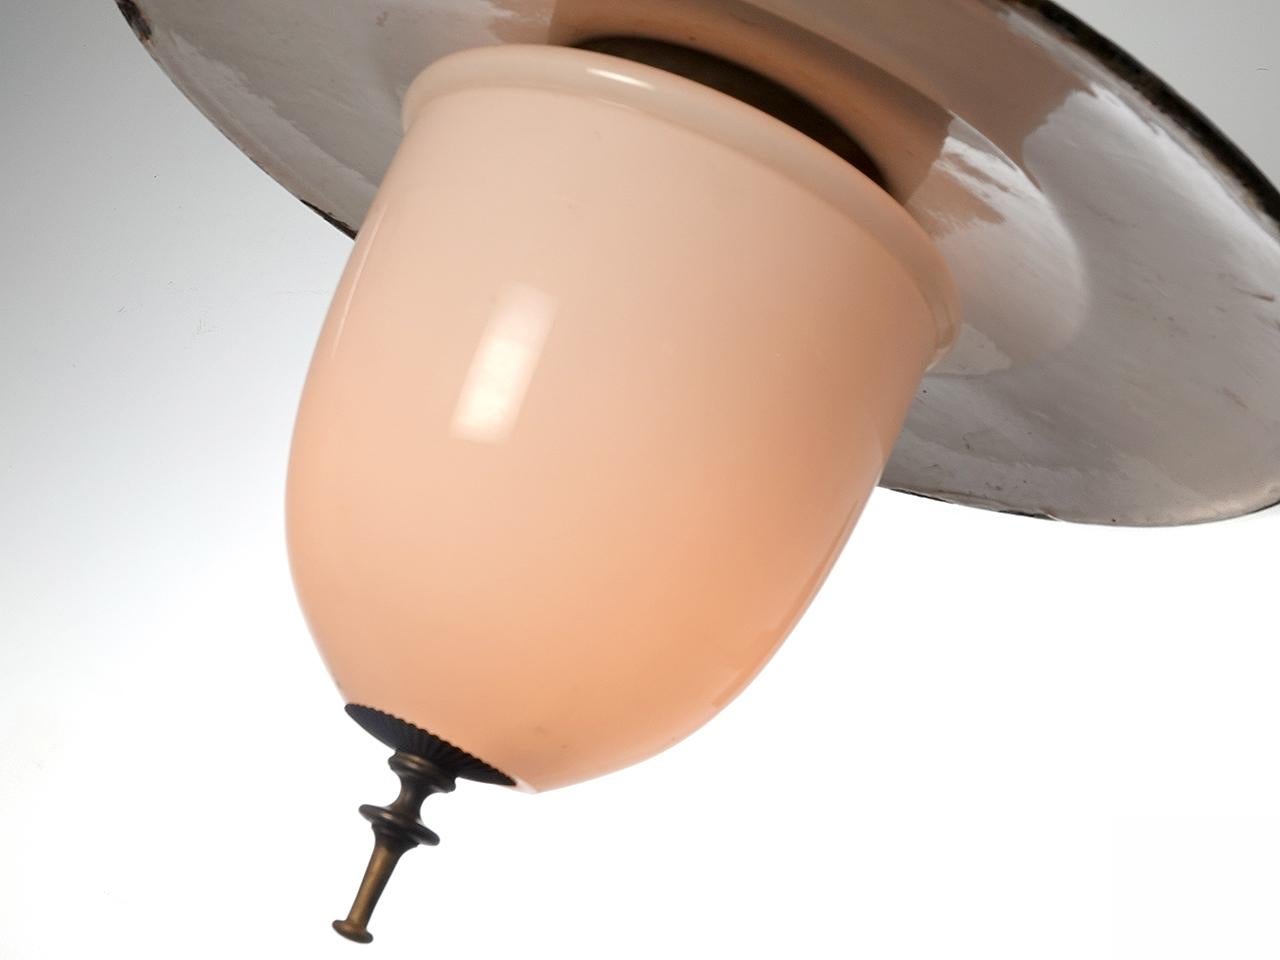 This large showy but simple white porcelain gas lamp (now wired for a standard bulb) has its original patina. It is fitted with a unique elongated milk glass shade and decorative bottom holder. The shade has an 18